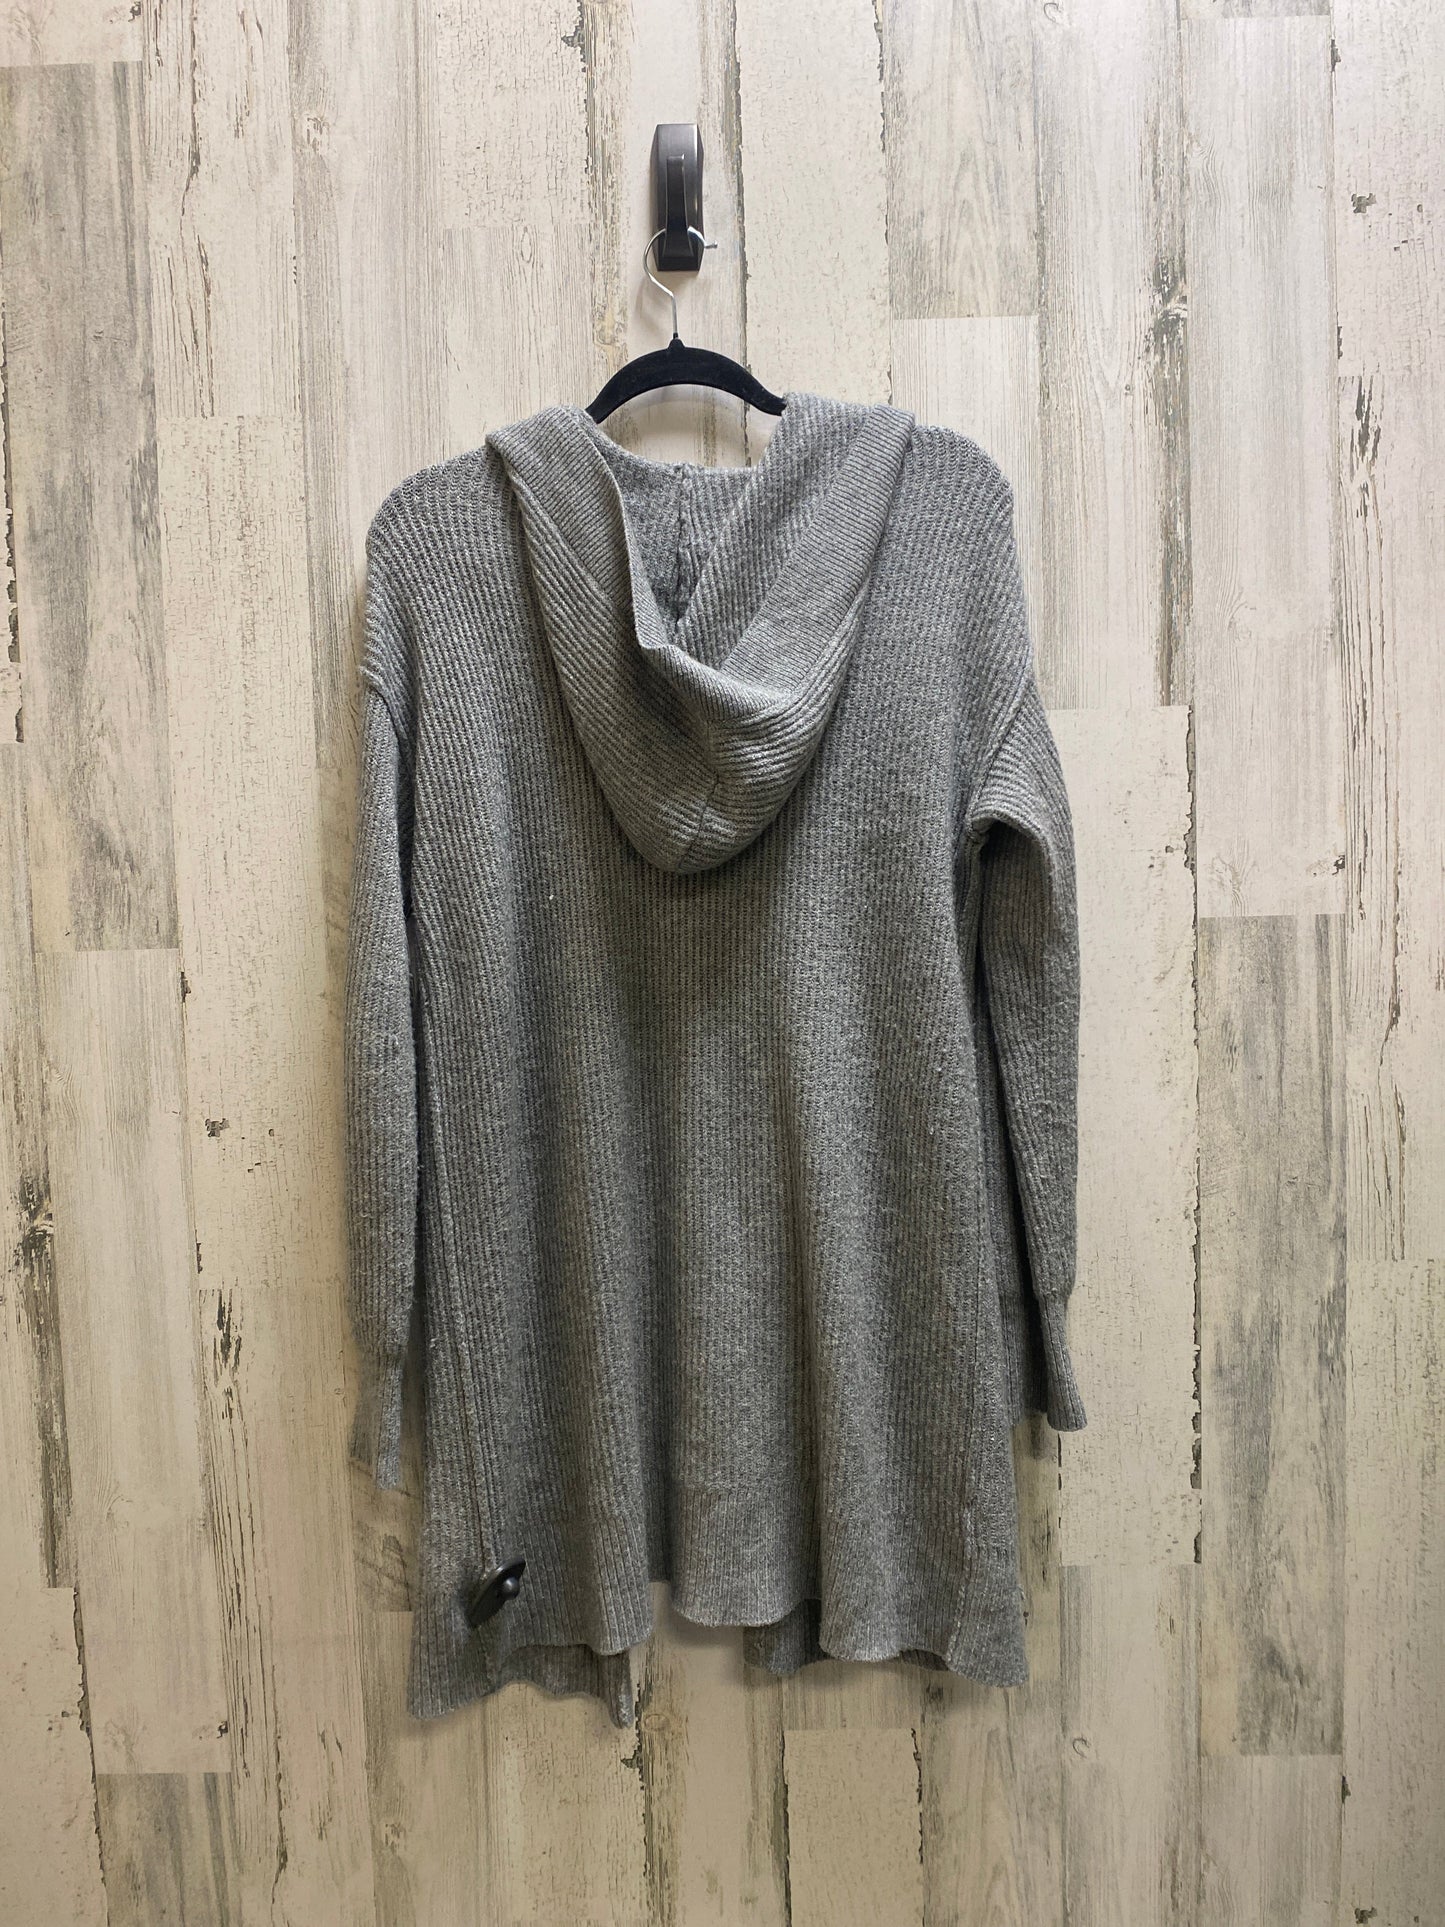 Sweater Cardigan By Aerie  Size: M